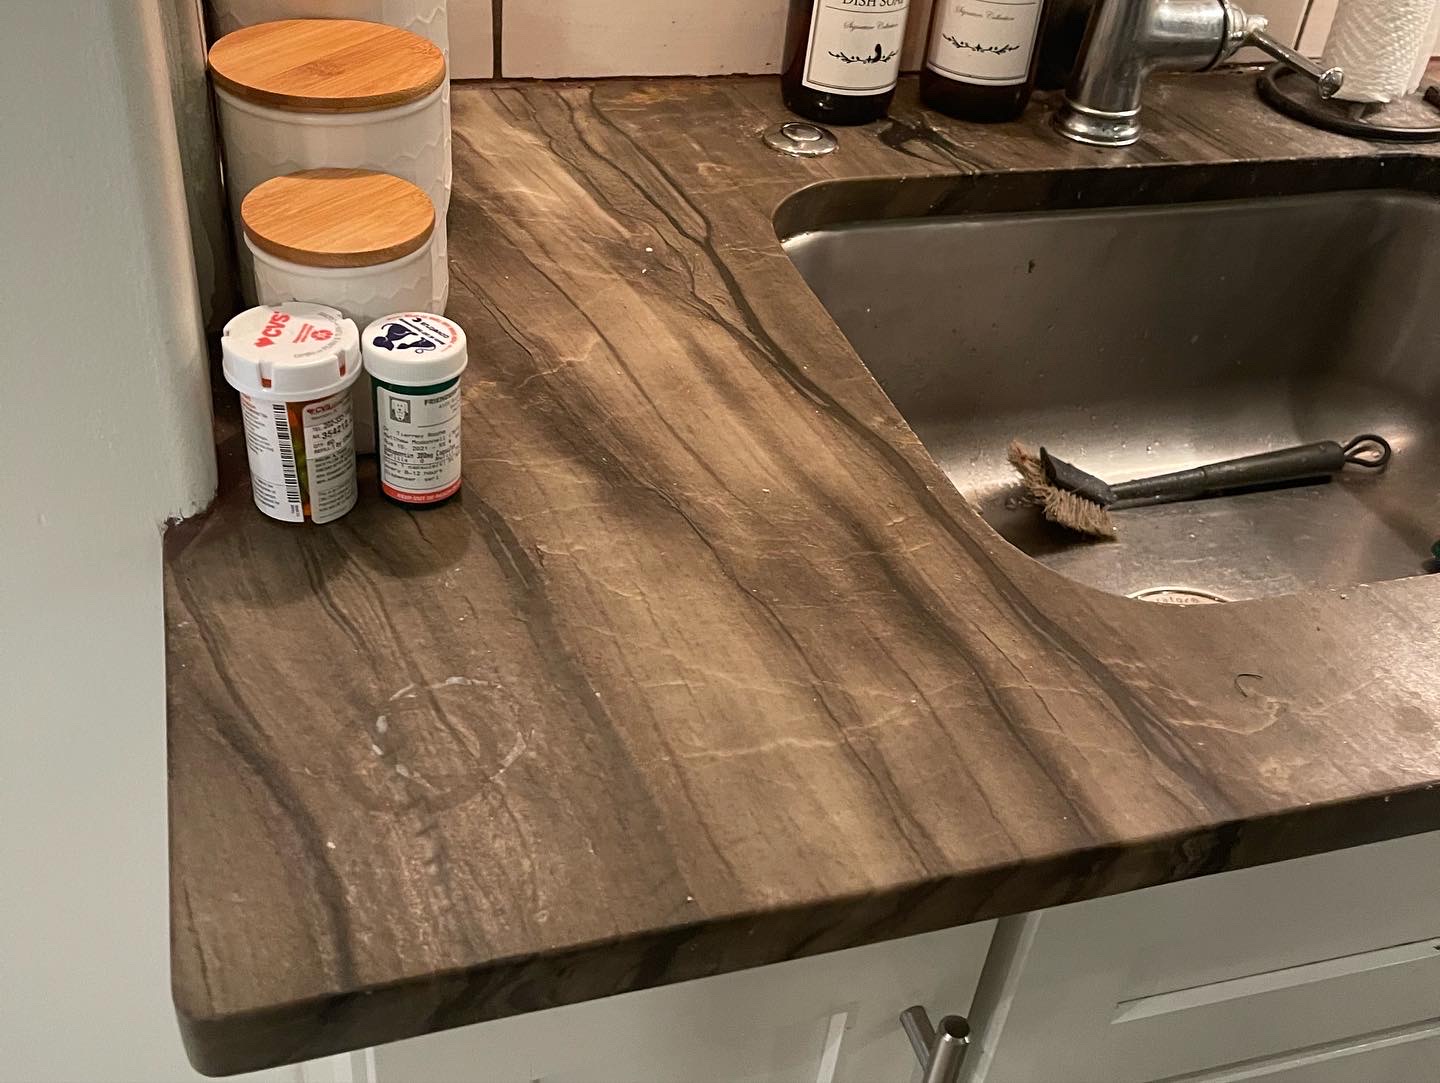 Leathered_Quartzite_Countertop_Etch_Removal_Sealing_8